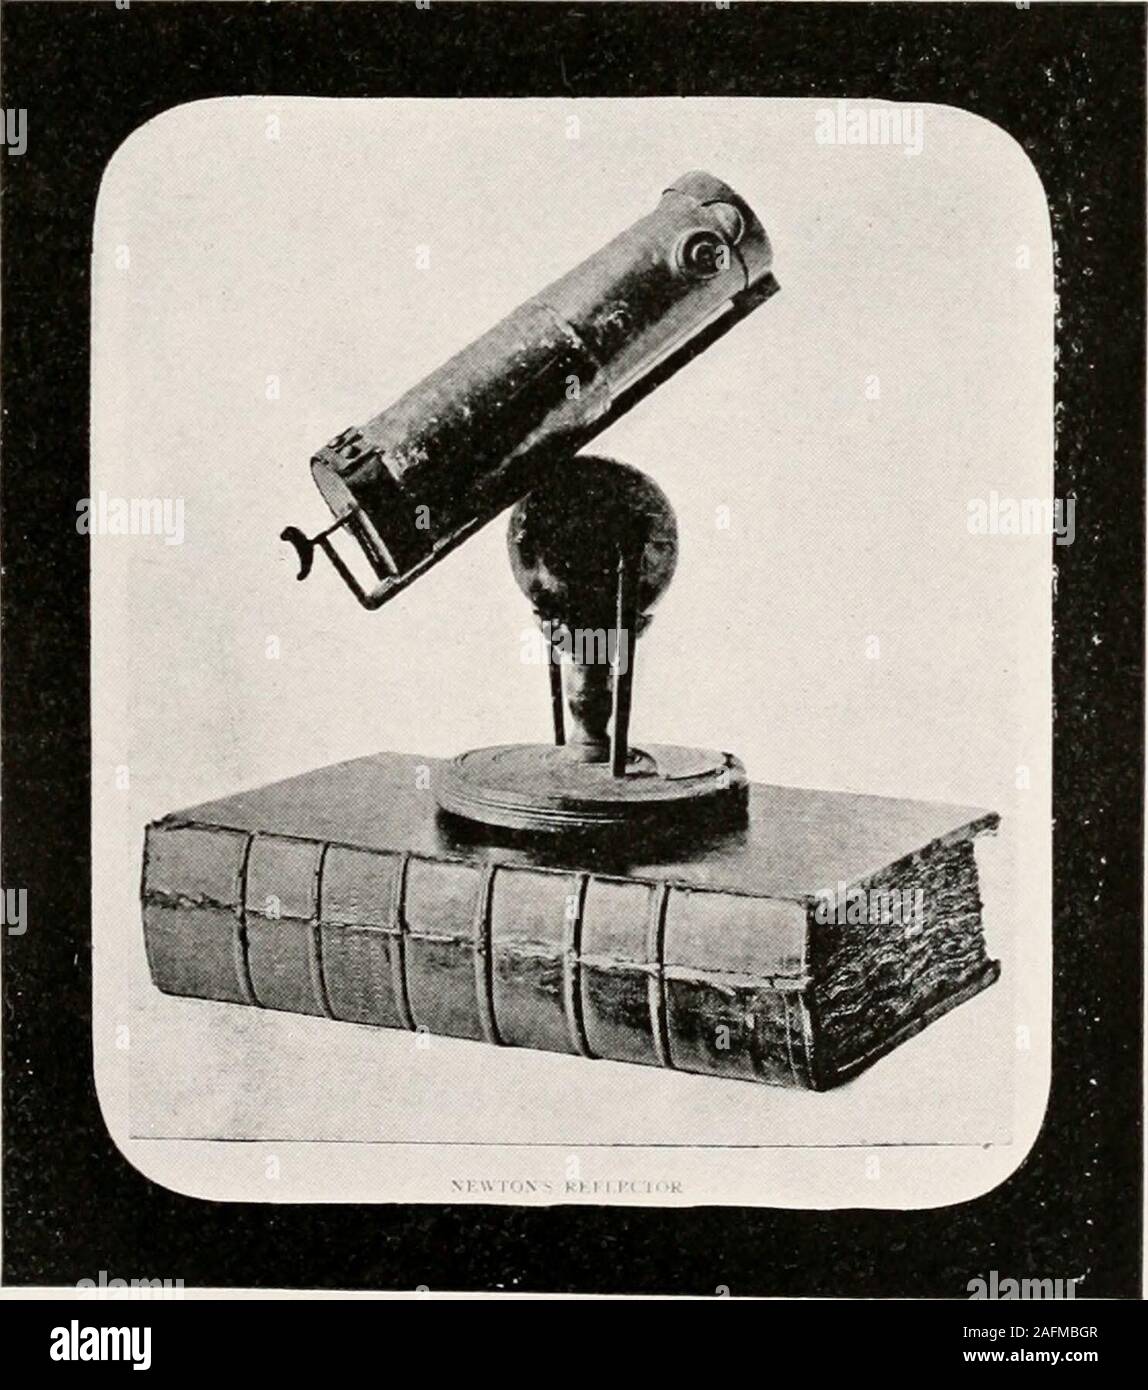 . The Adolfo Stahl lectures in astronomy, delivered in San Francisco, California, in 1916-17 and 1917-18, under the auspices of the Astronomical Society of the Pacific. Fig. 1—The Well of Eratosthenes.. Fig. 2—Newtons Reflector.PLATE XXXL Important Epochs ix AsTRoxo^rv 129 angular distance of the Sun from the zenith was found to beapproximately ^^oth of a complete circumference, or about 7°.If Syene is assumed to be directly south of Alexandria, thenit follows, from this observation, that the distance betweenthem is Y^oih of the circumference of the Earth. The geometrical principle involved wi Stock Photo